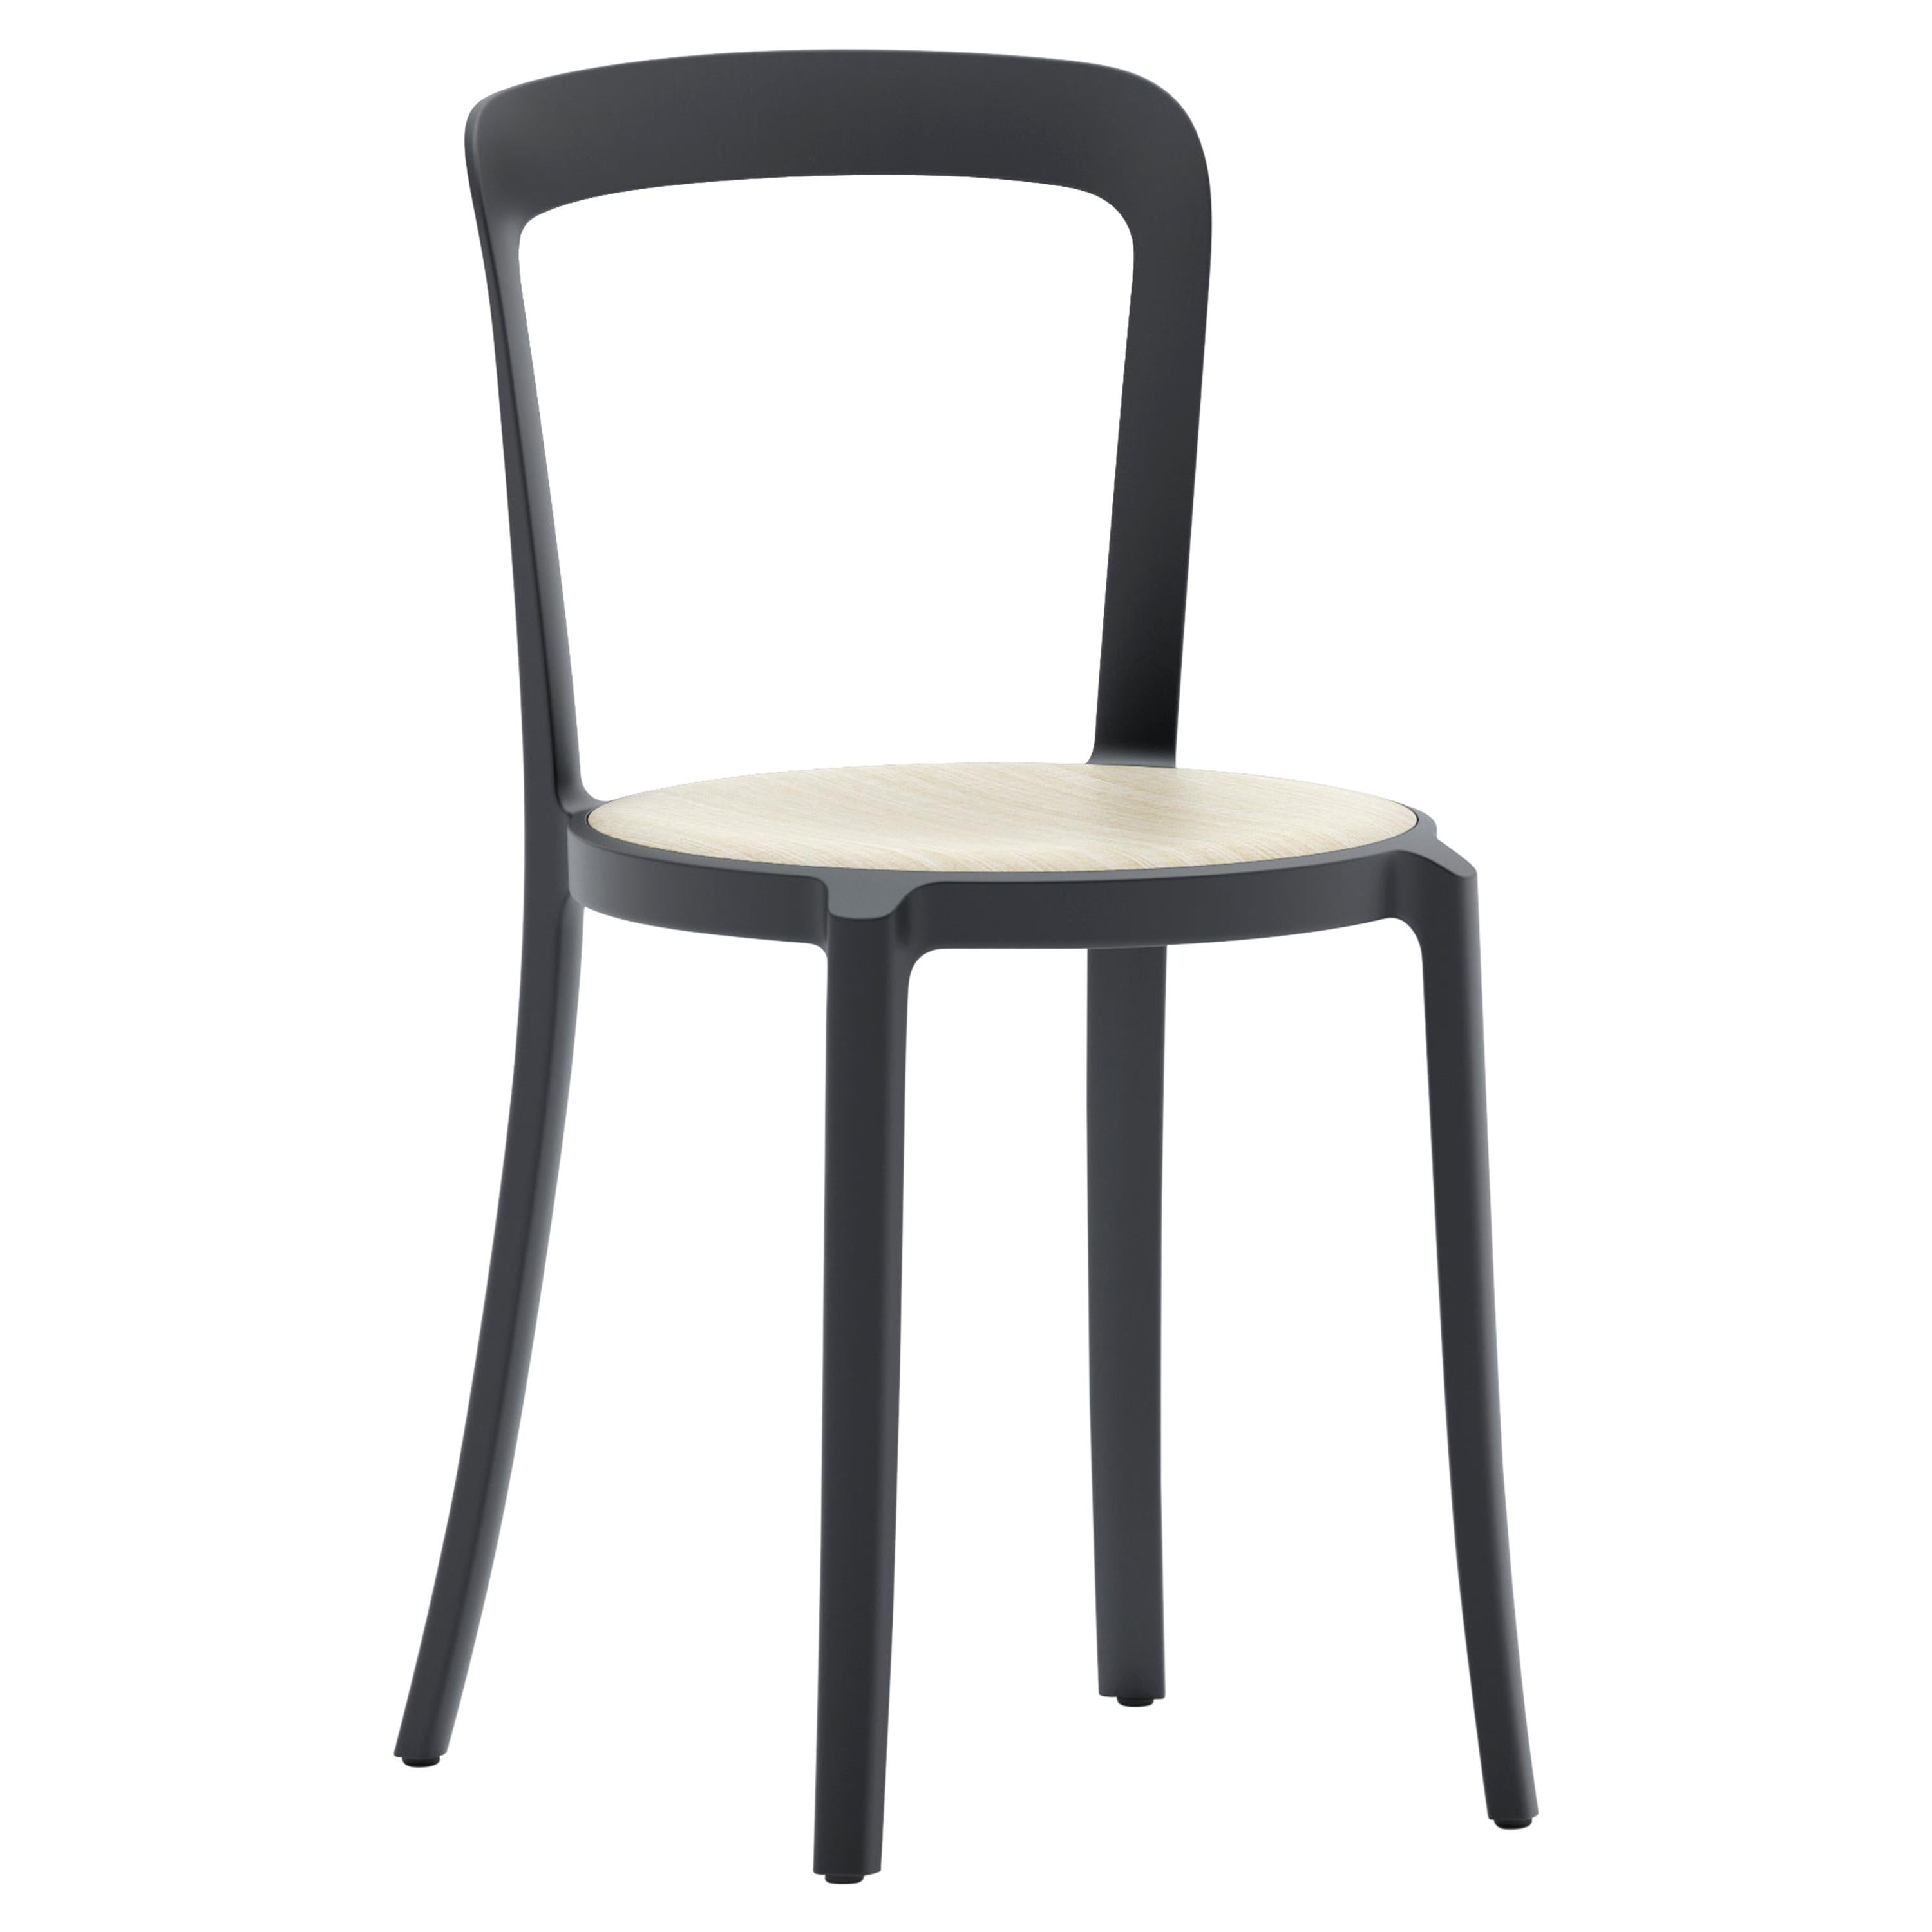 Emeco On & On Stacking Chair in Black with Ash Plywood seat by Barber & Osgerby